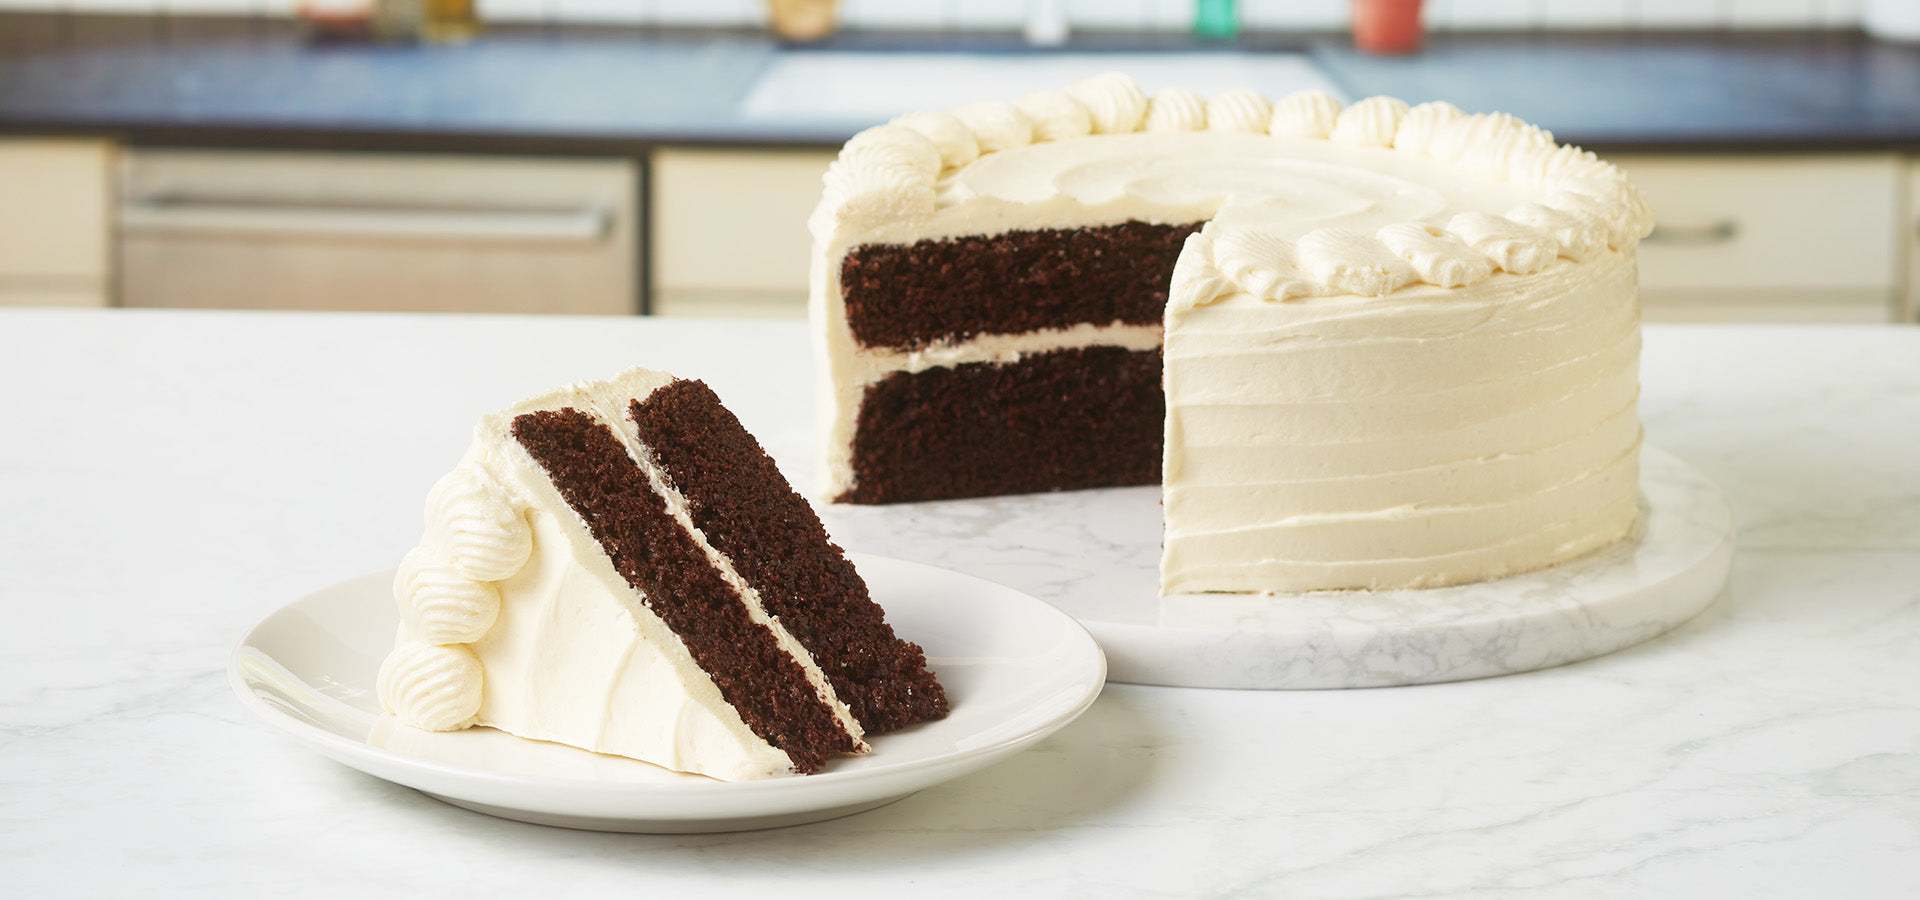 Chocolate cake with vanilla frosting. Slice of cake sitting in front of full cake.